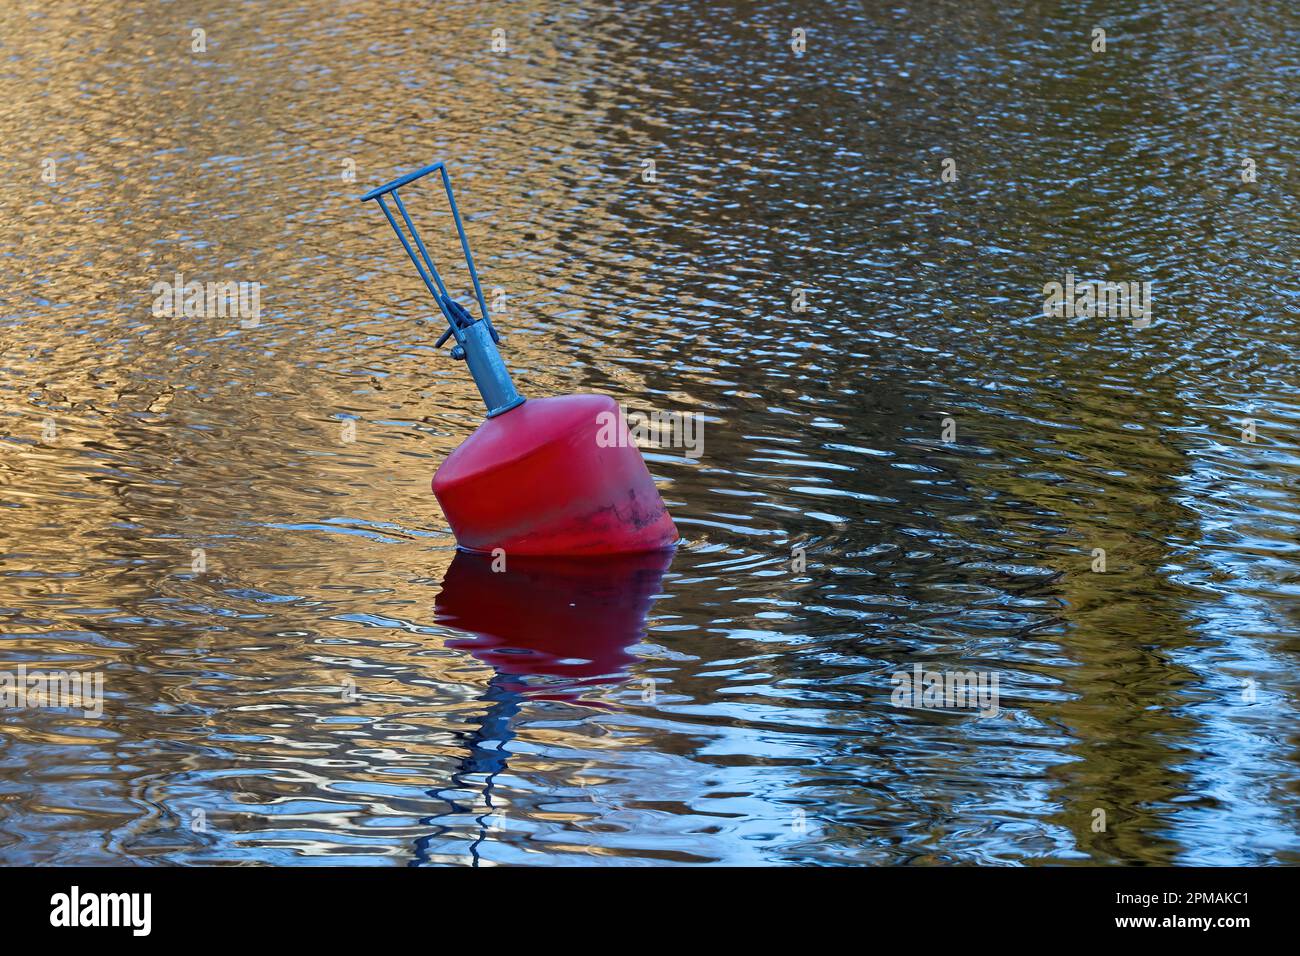 A red buoy floats on the surface of the lake Stock Photo